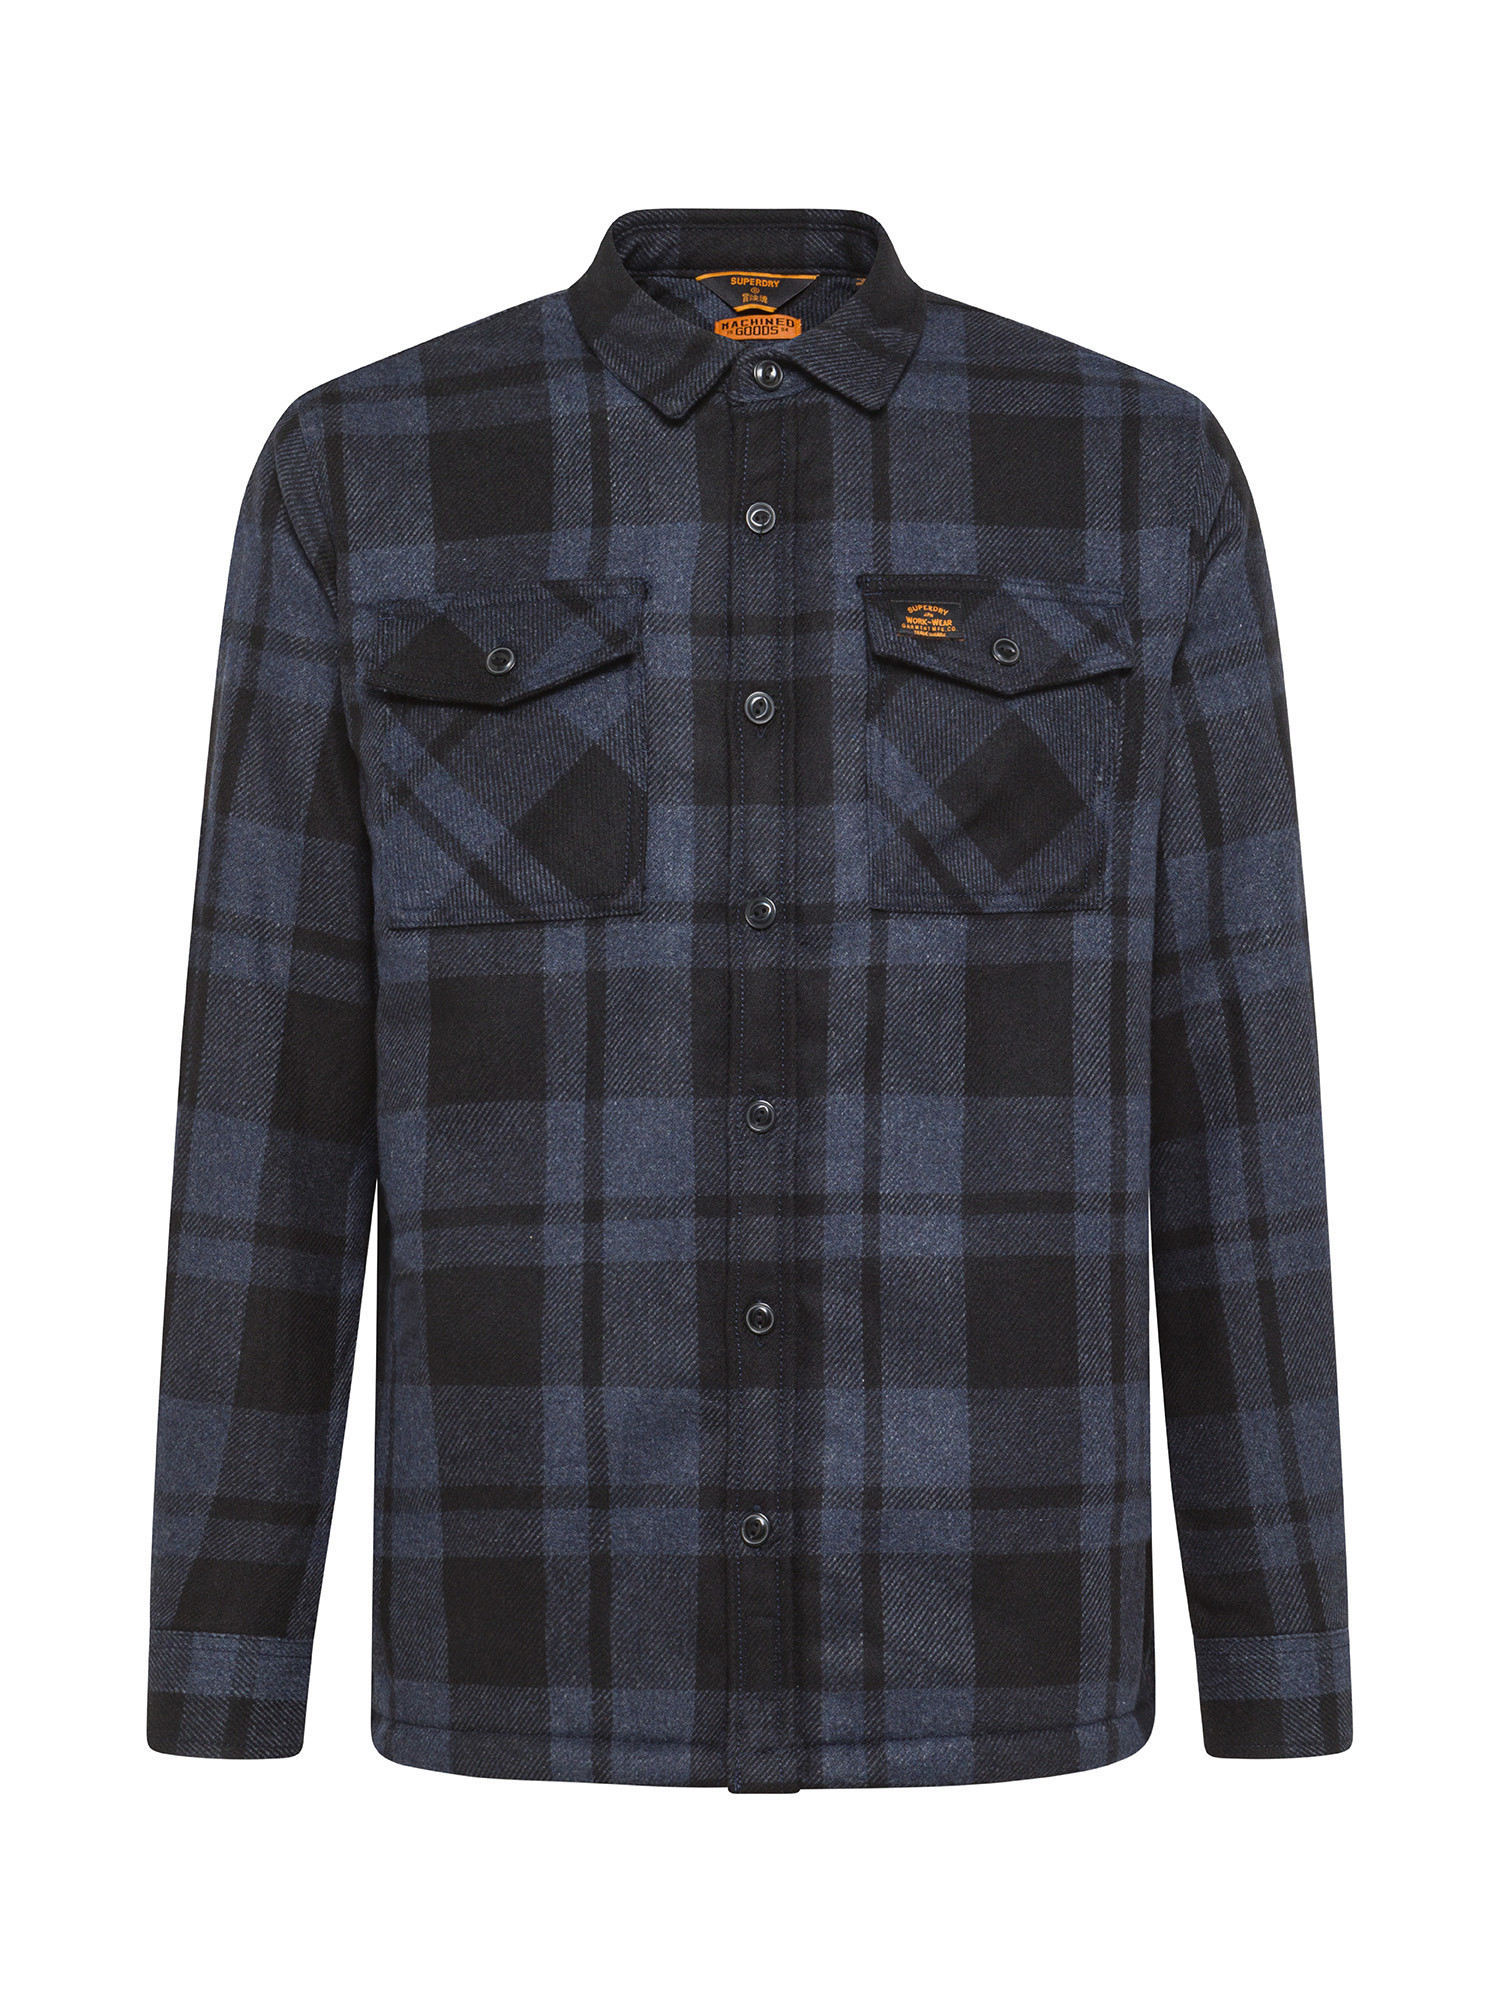 Superdry - Camicia foderata in sherpa, Grigio antracite, large image number 0